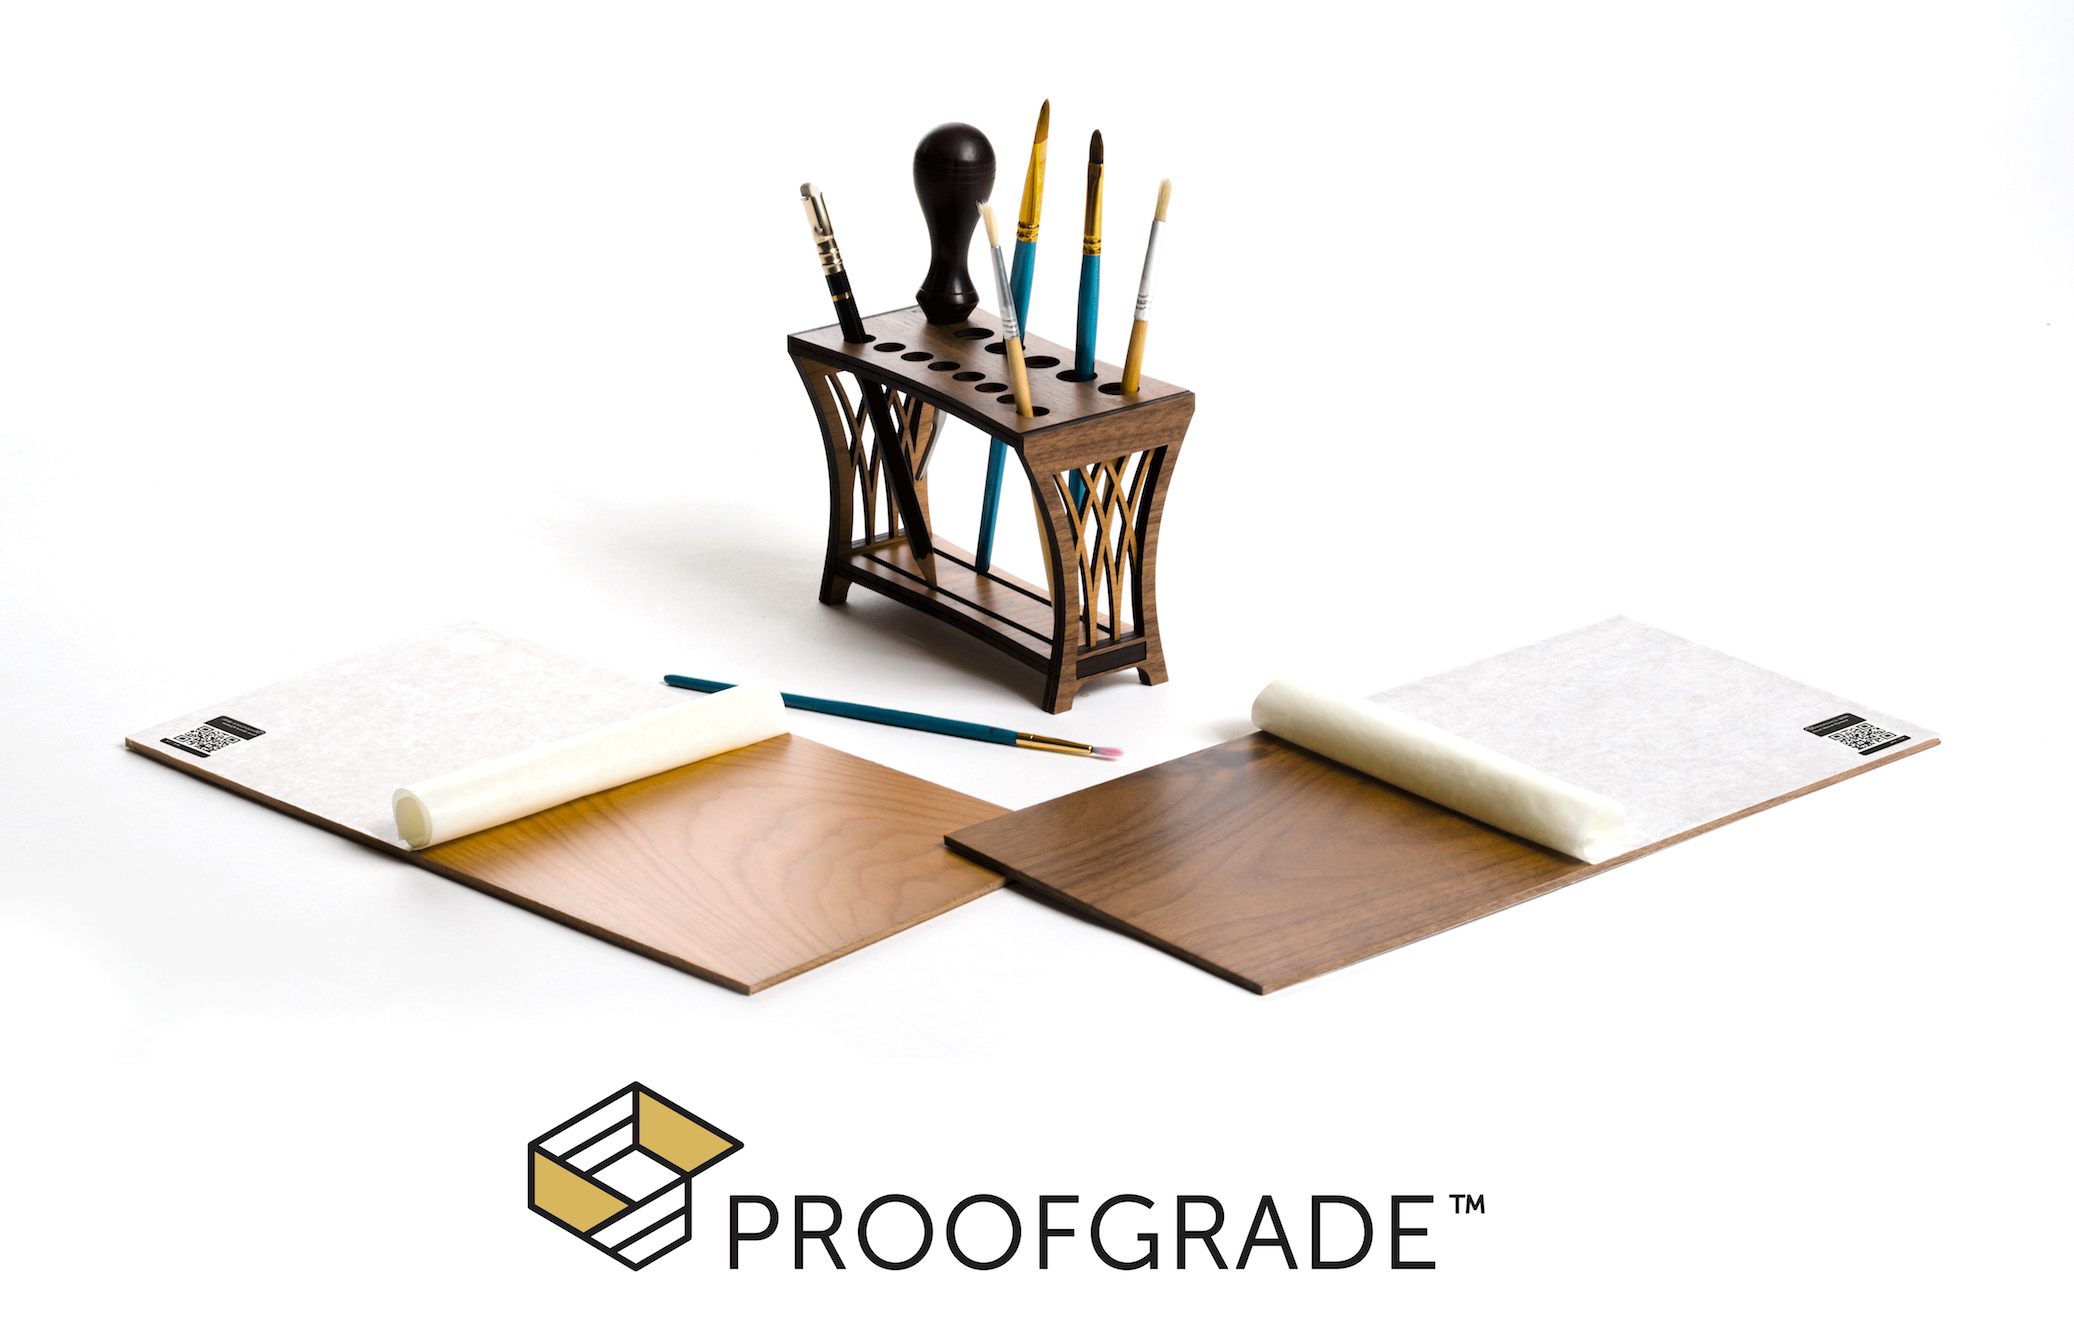 Glowforge Launches Proofgrade Materials after $70,000,000 in 3D Laser  Printer Sales